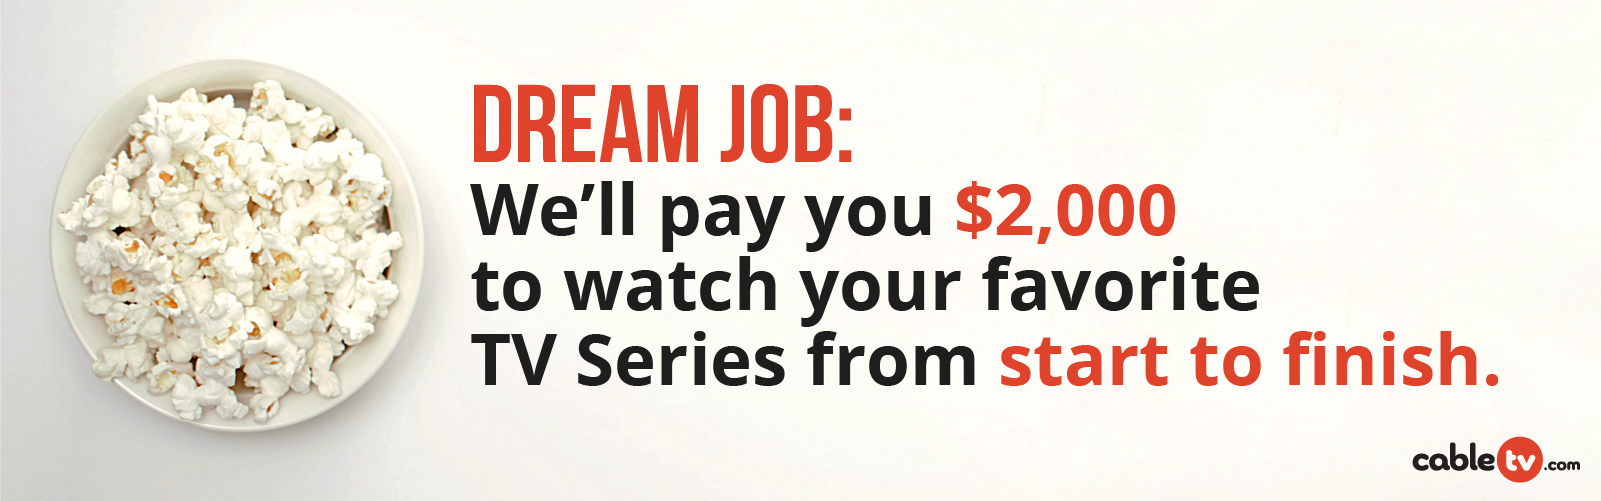 We'll pay you to watch your favorite T V series